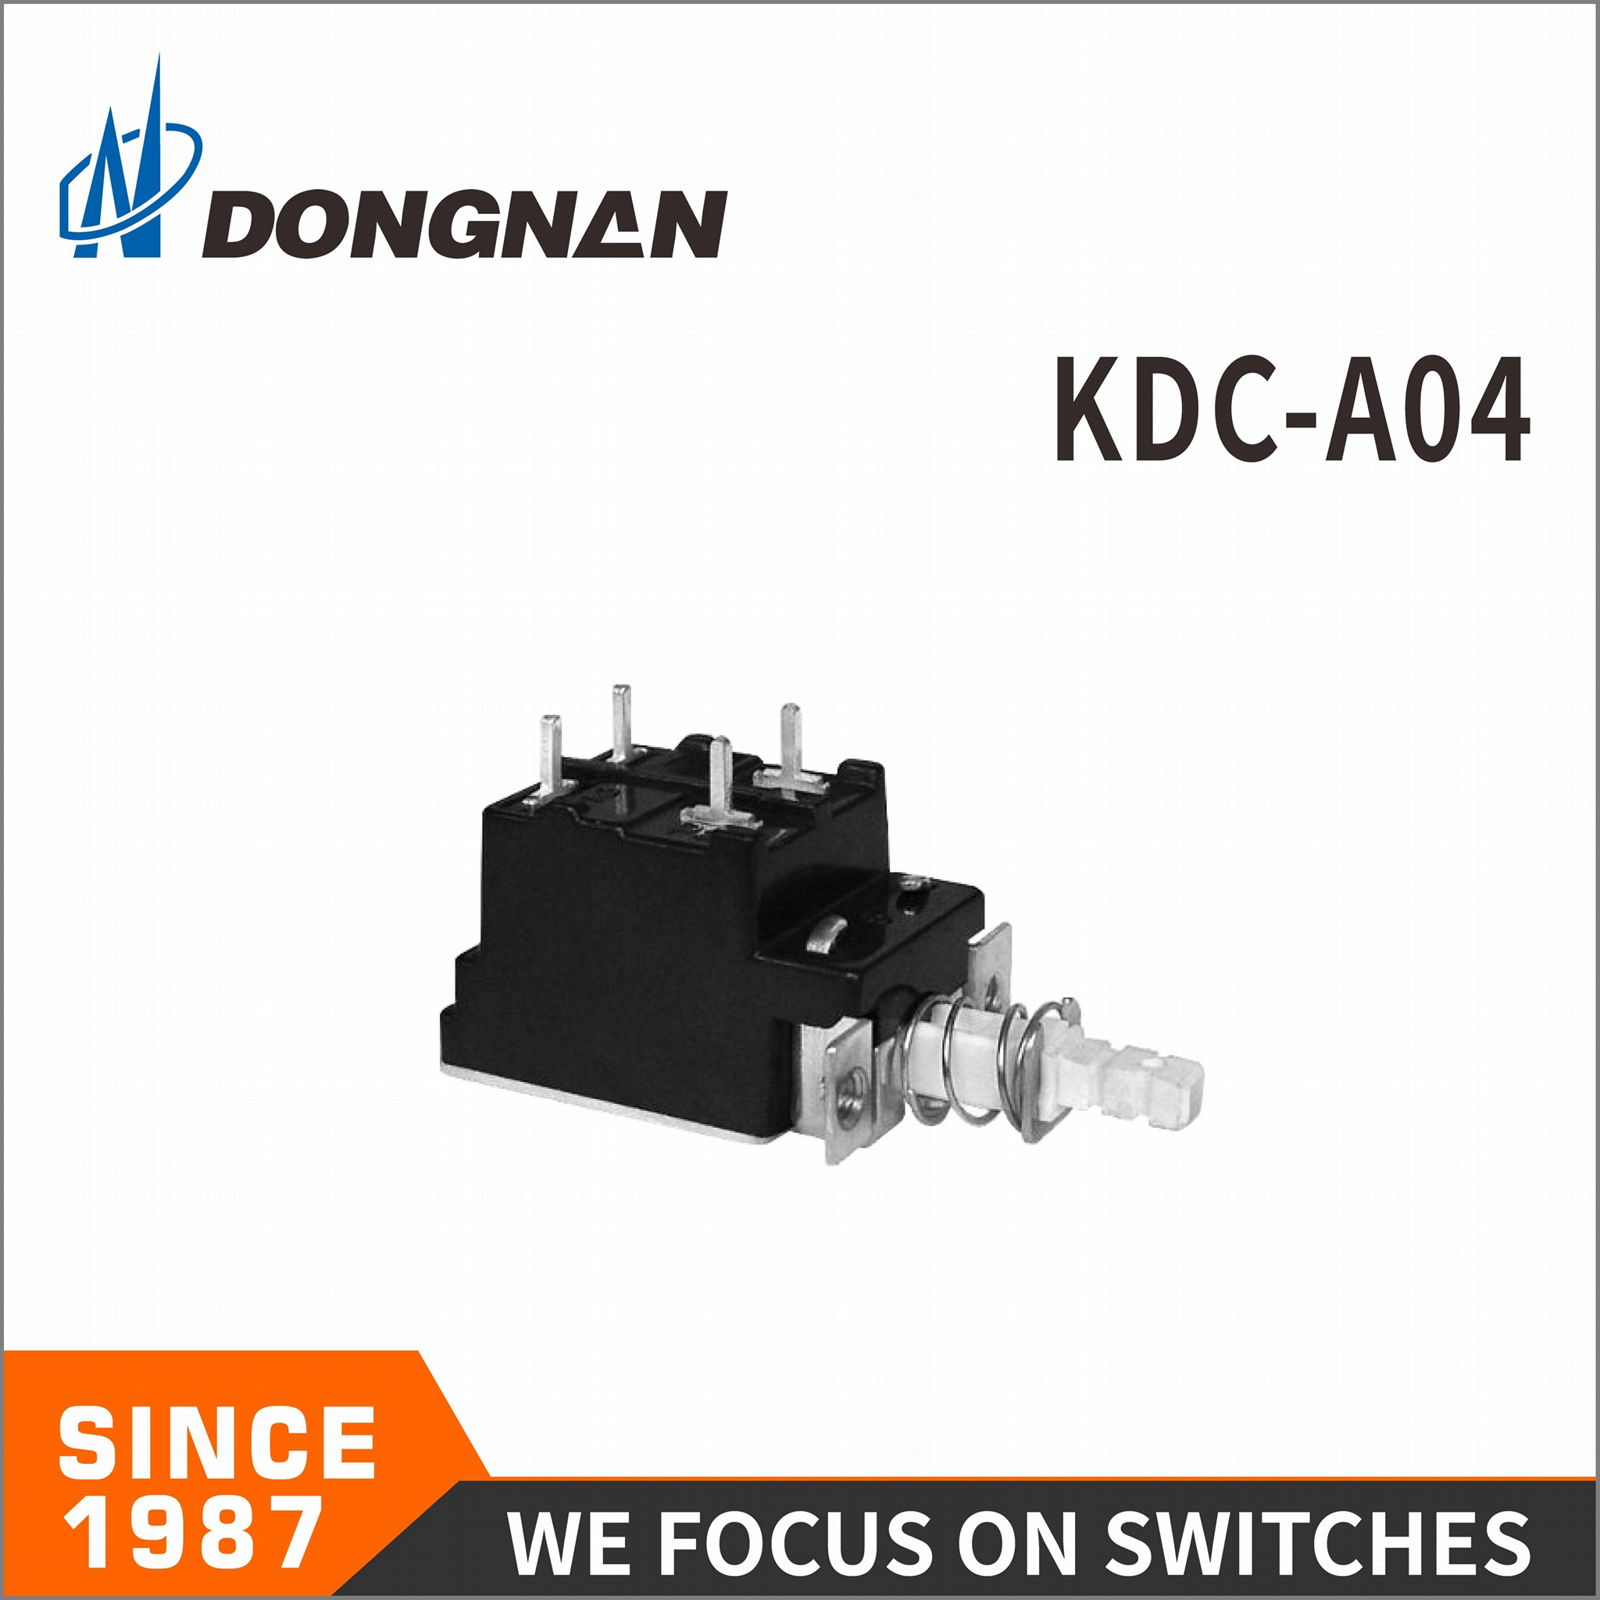 Dongnan Kdc-A04 Power Switch for Computer Long Life 5